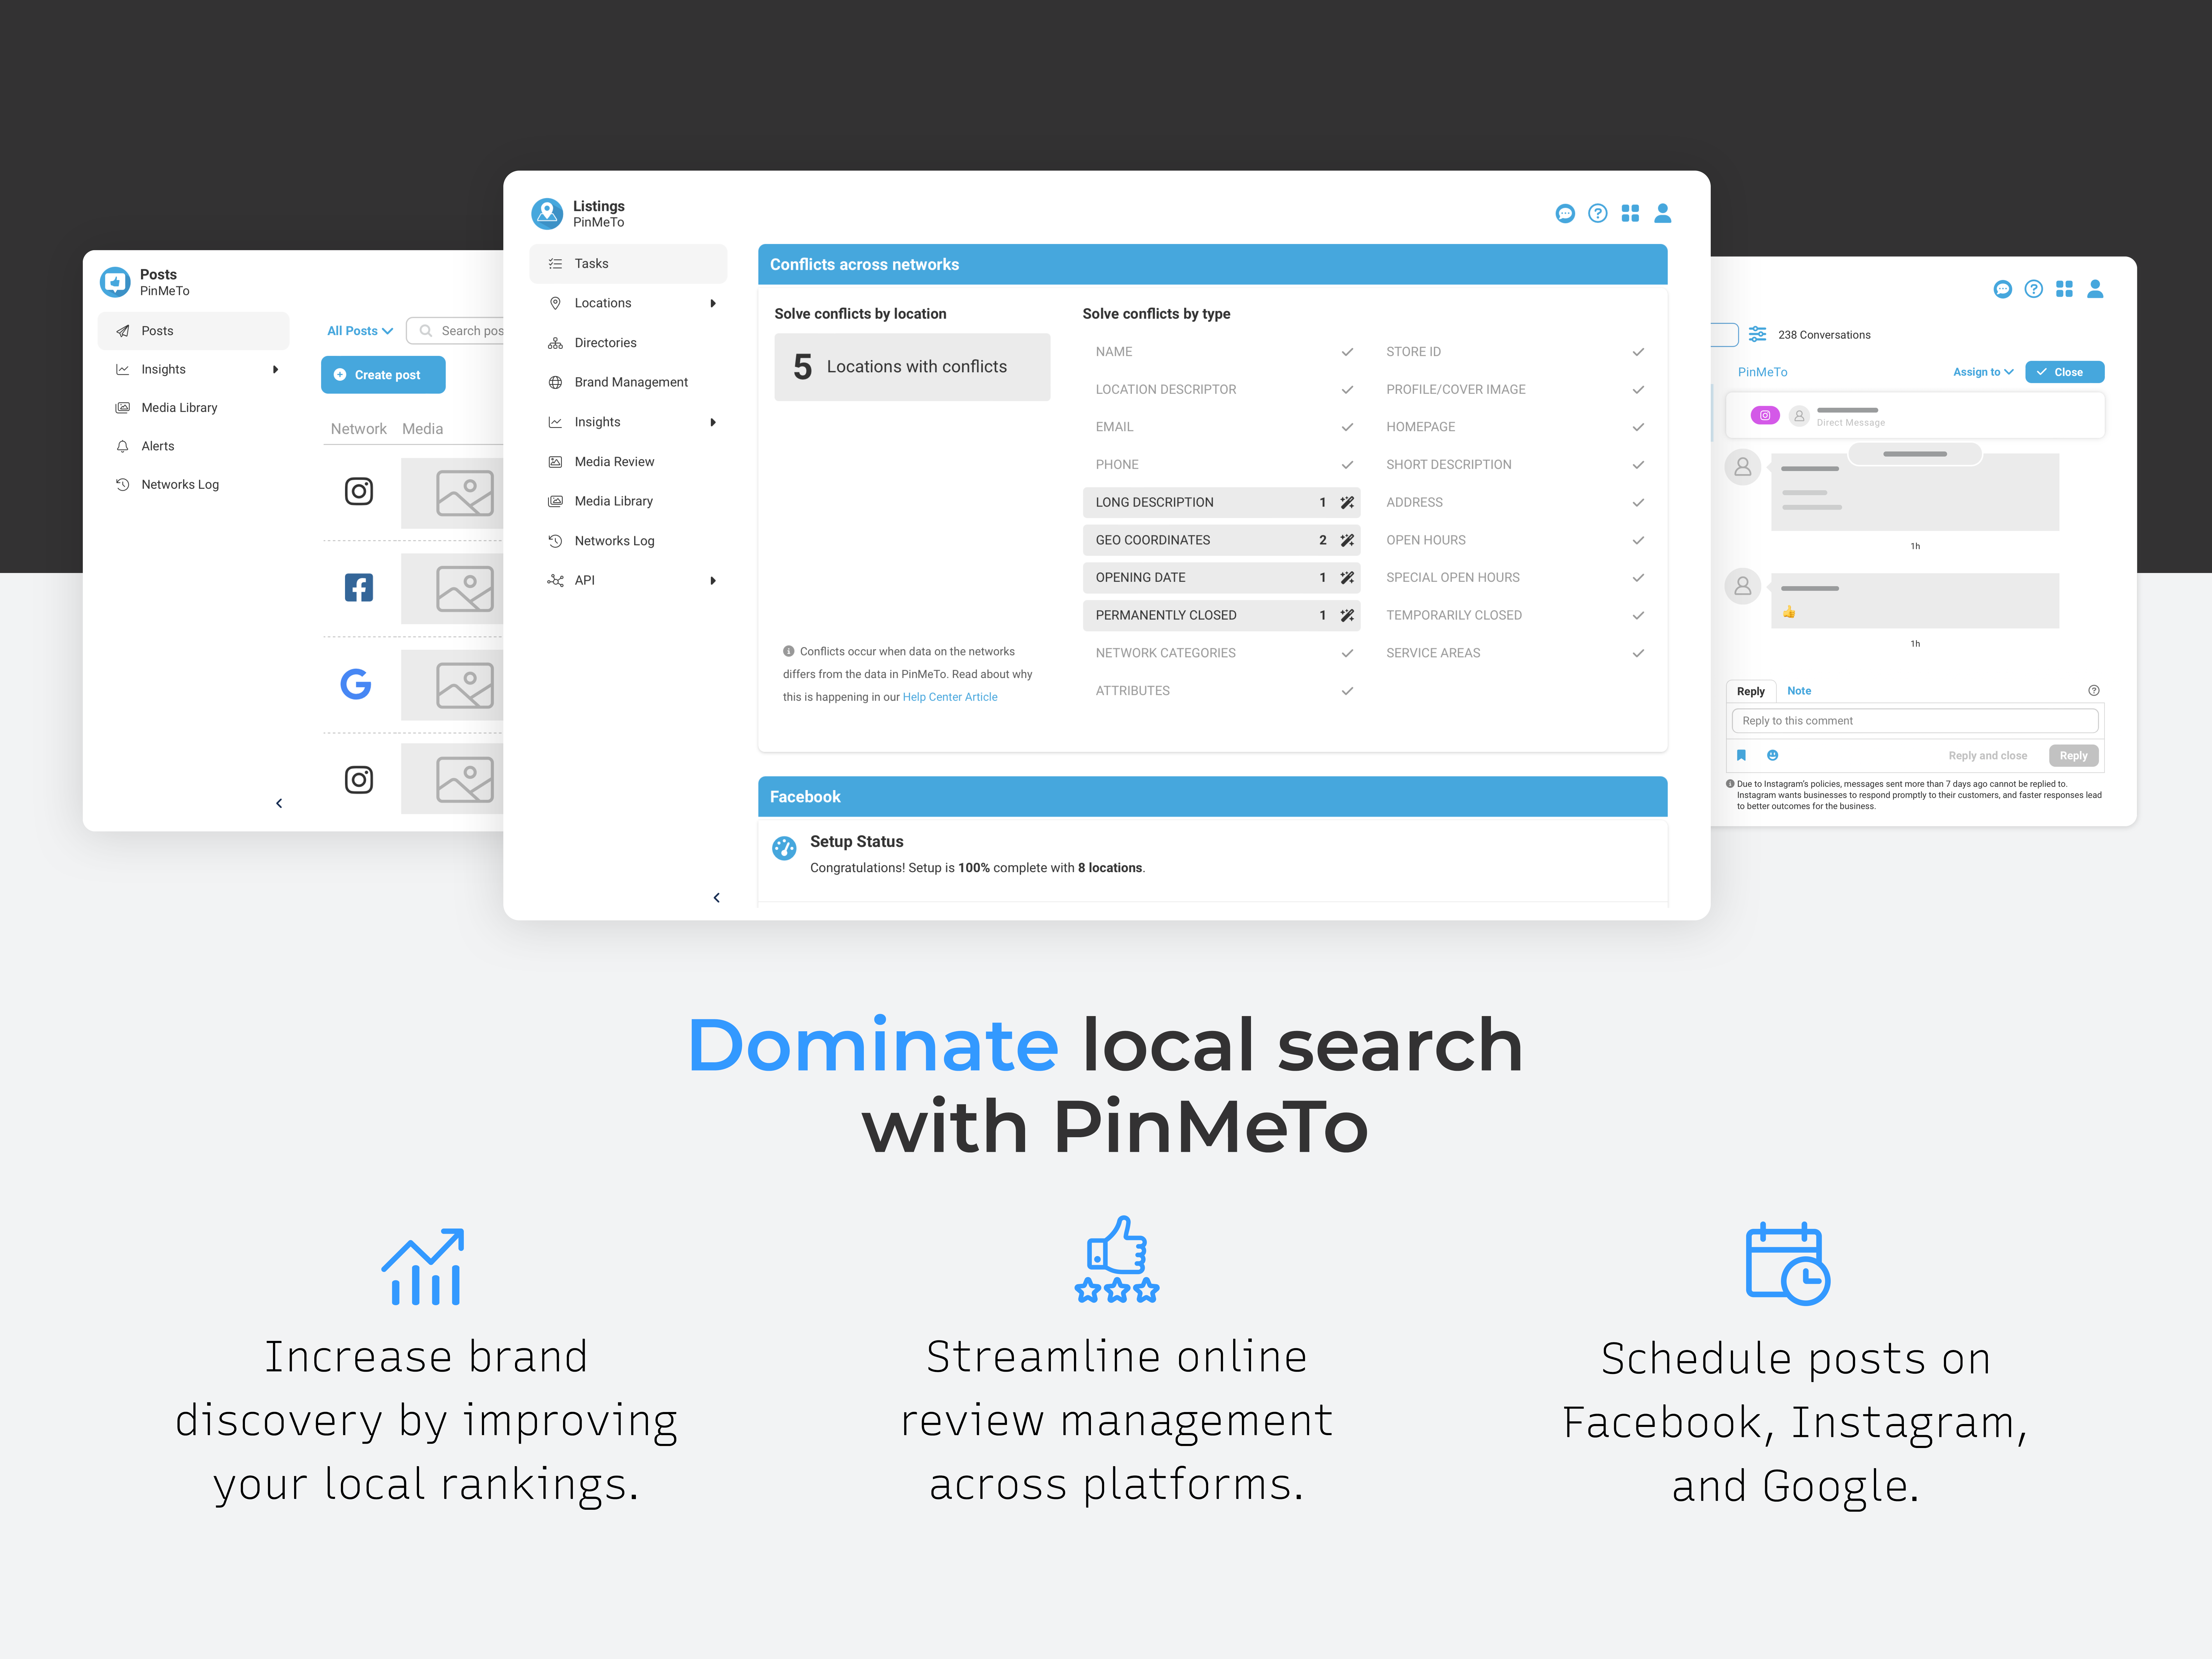 PinMeTo Overview: Dominate local search with PinMeTo